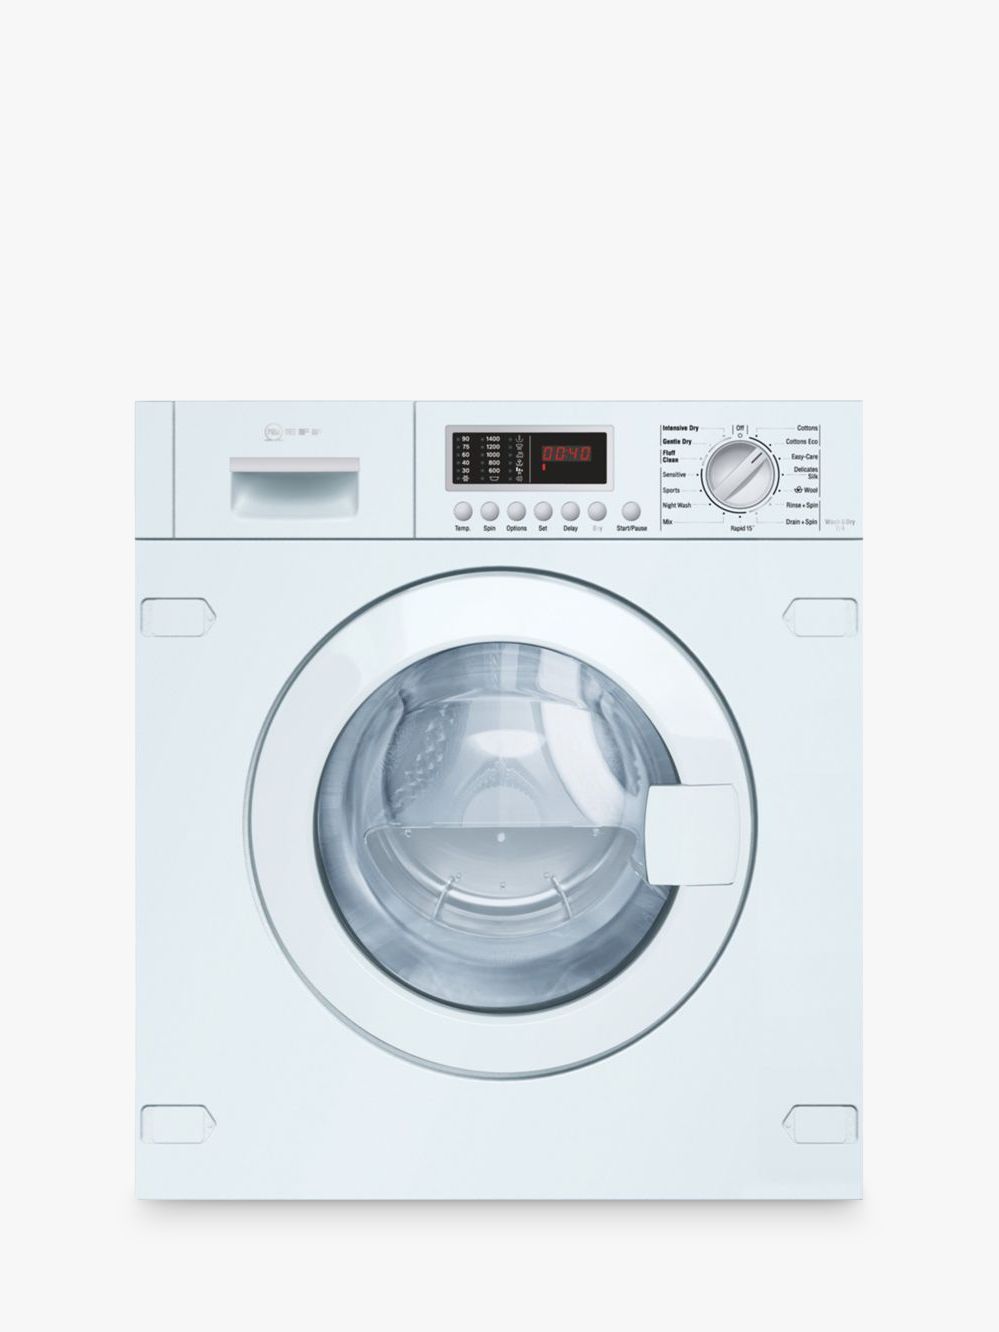 Neff V6540X1GB Integrated Washer Dryer, 7kg Wash/4kg Dry Load, B Energy Rating, 1400rpm Spin